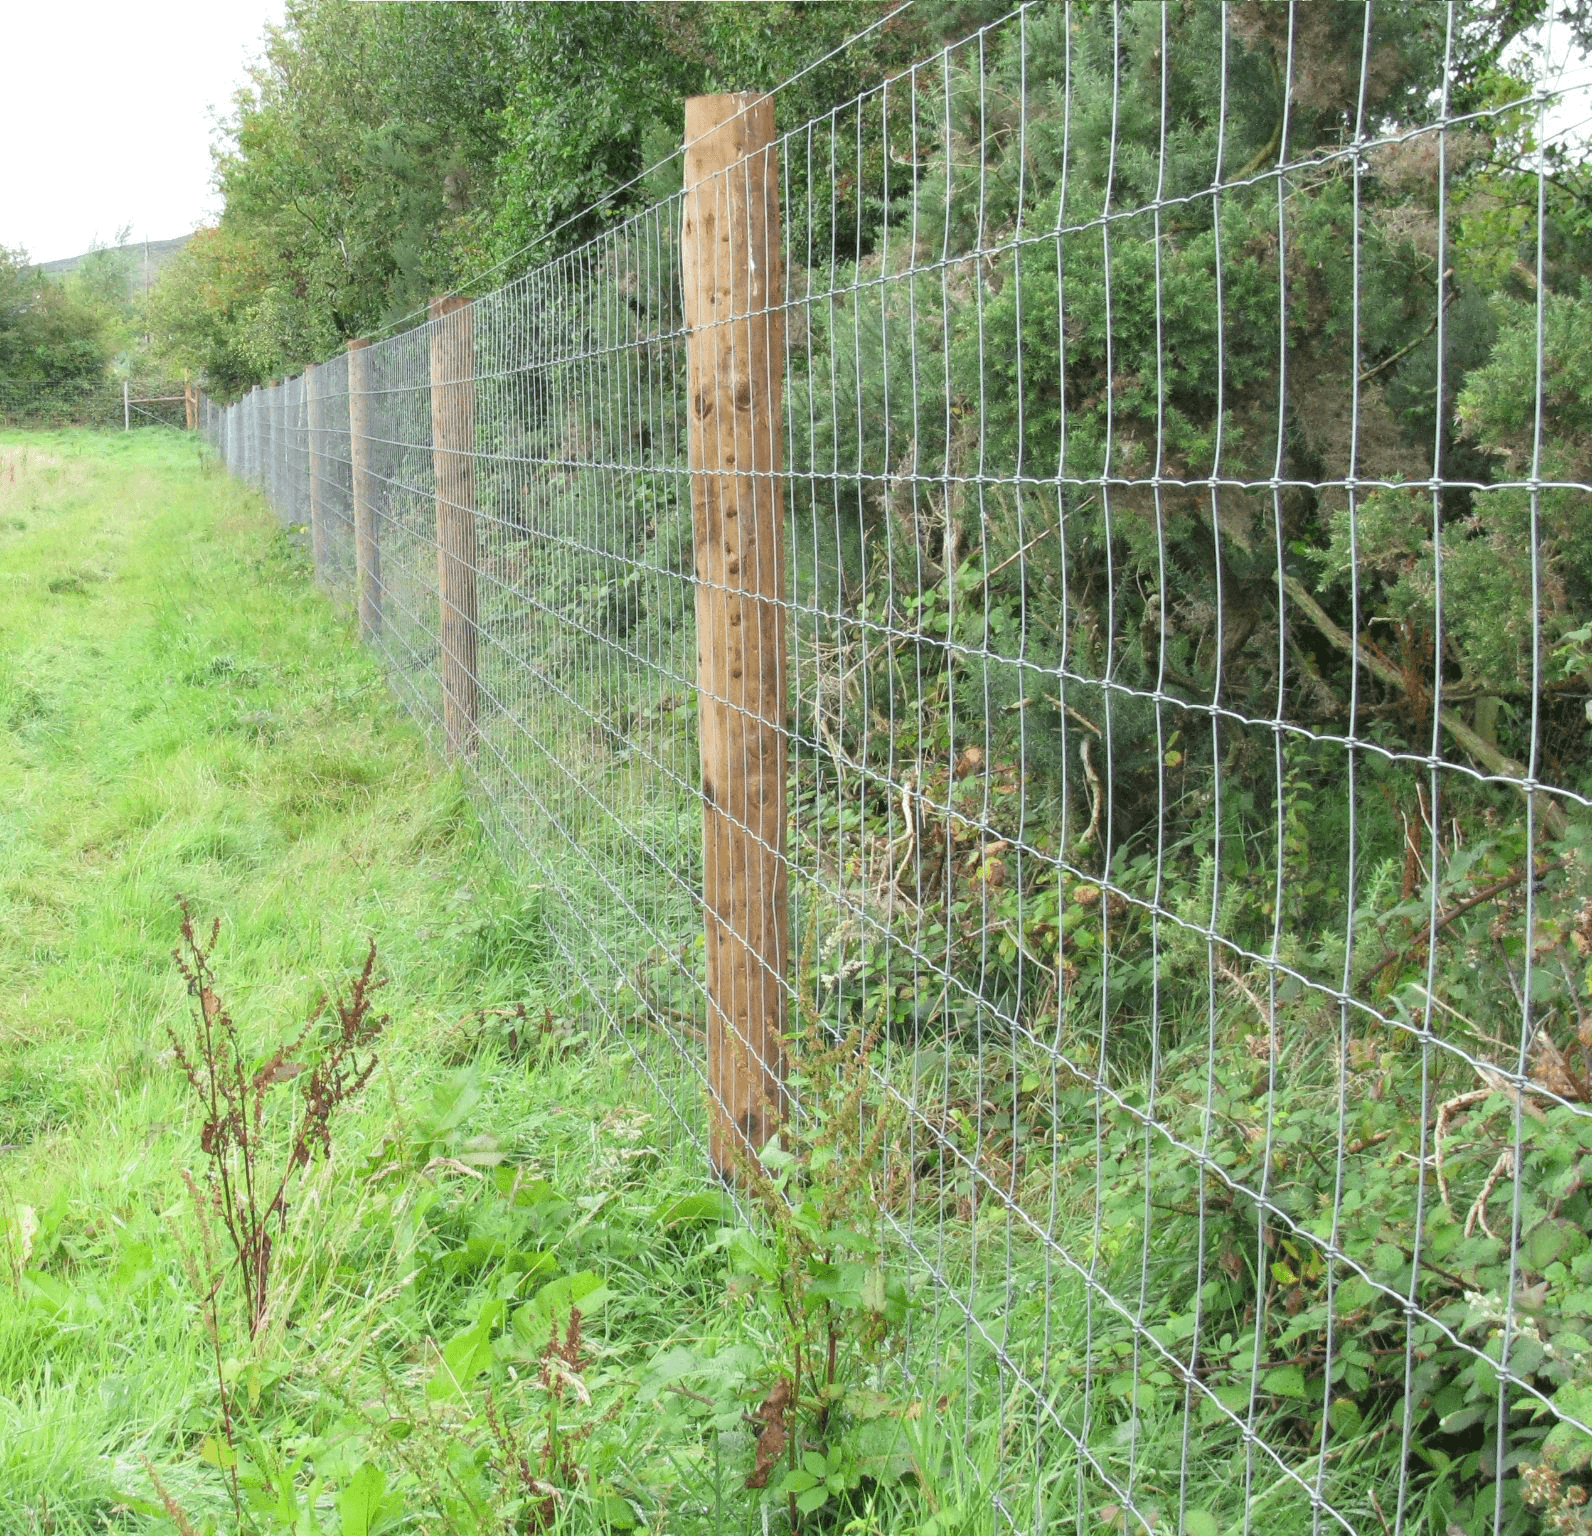 A picture of fencing with wooden poles and wire mesh